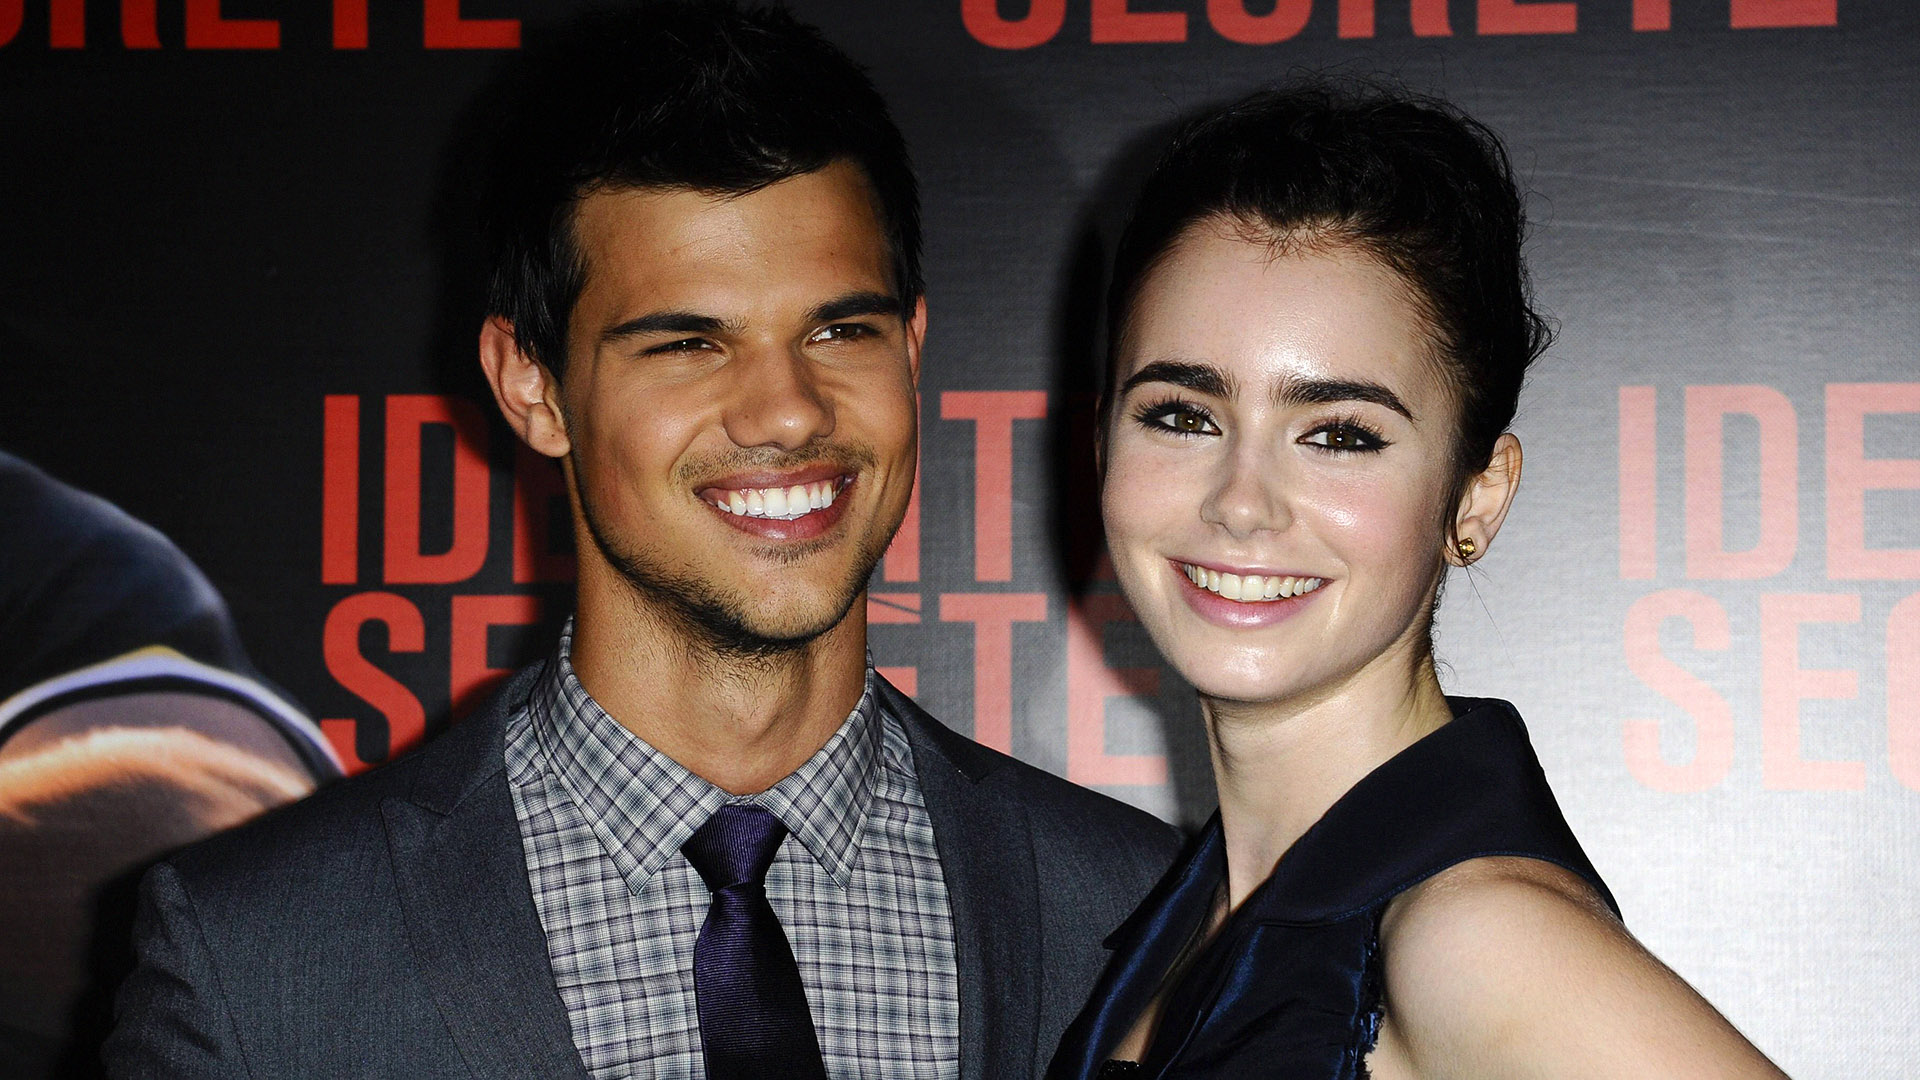 5 Things Taylor Lautner's Celeb Exes Said About Him (#4 Will Make You Go 'Aww')